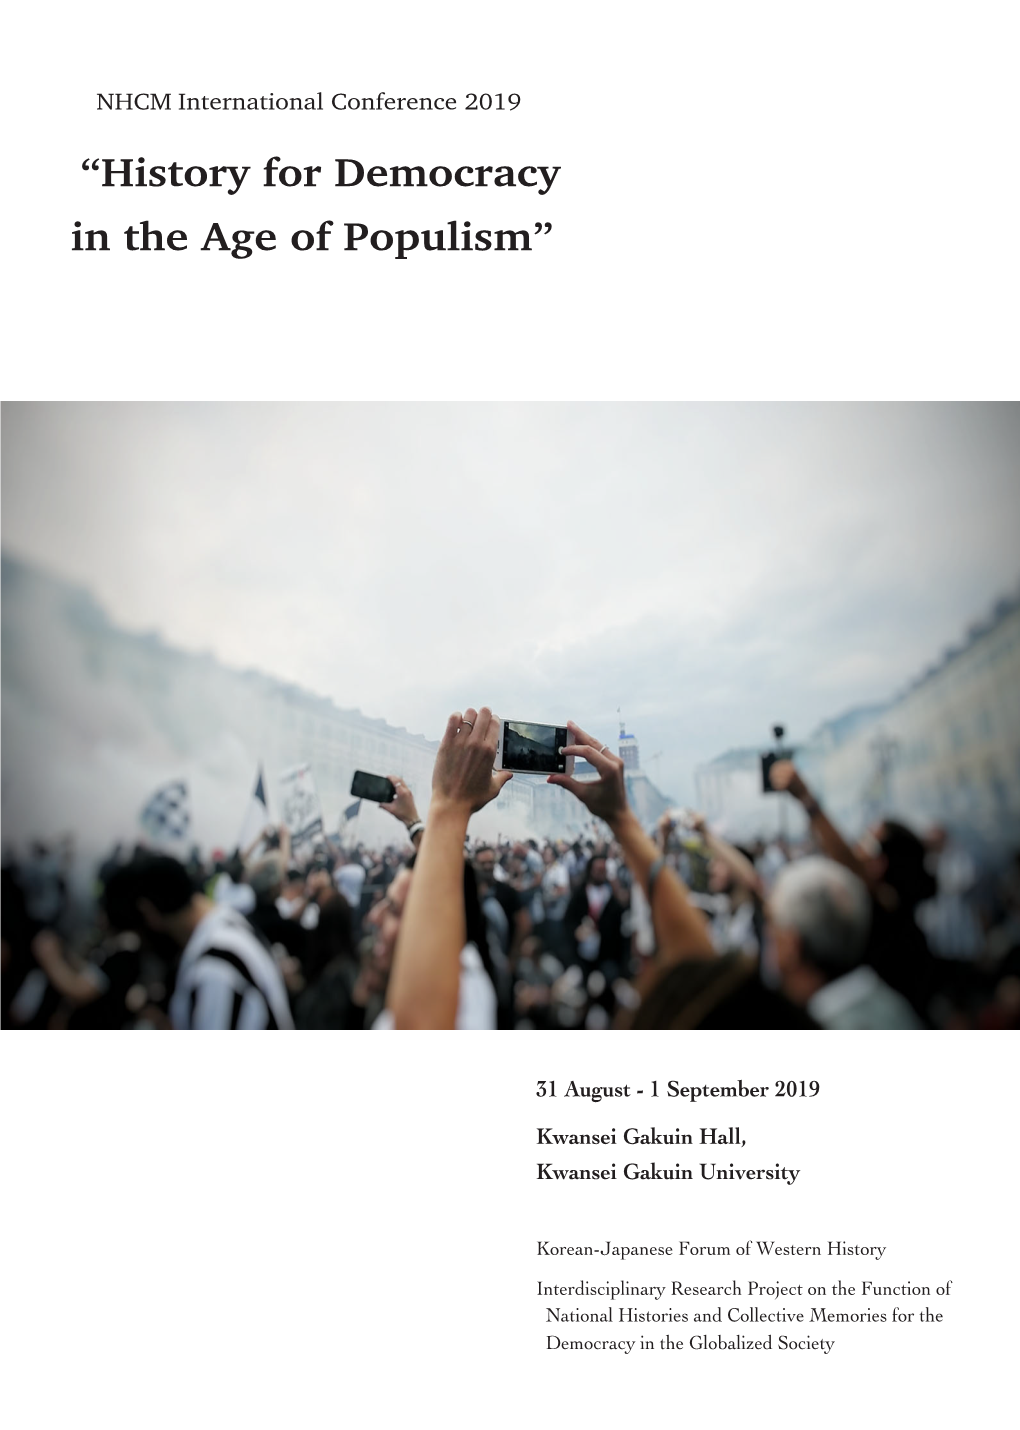 “History for Democracy in the Age of Populism”